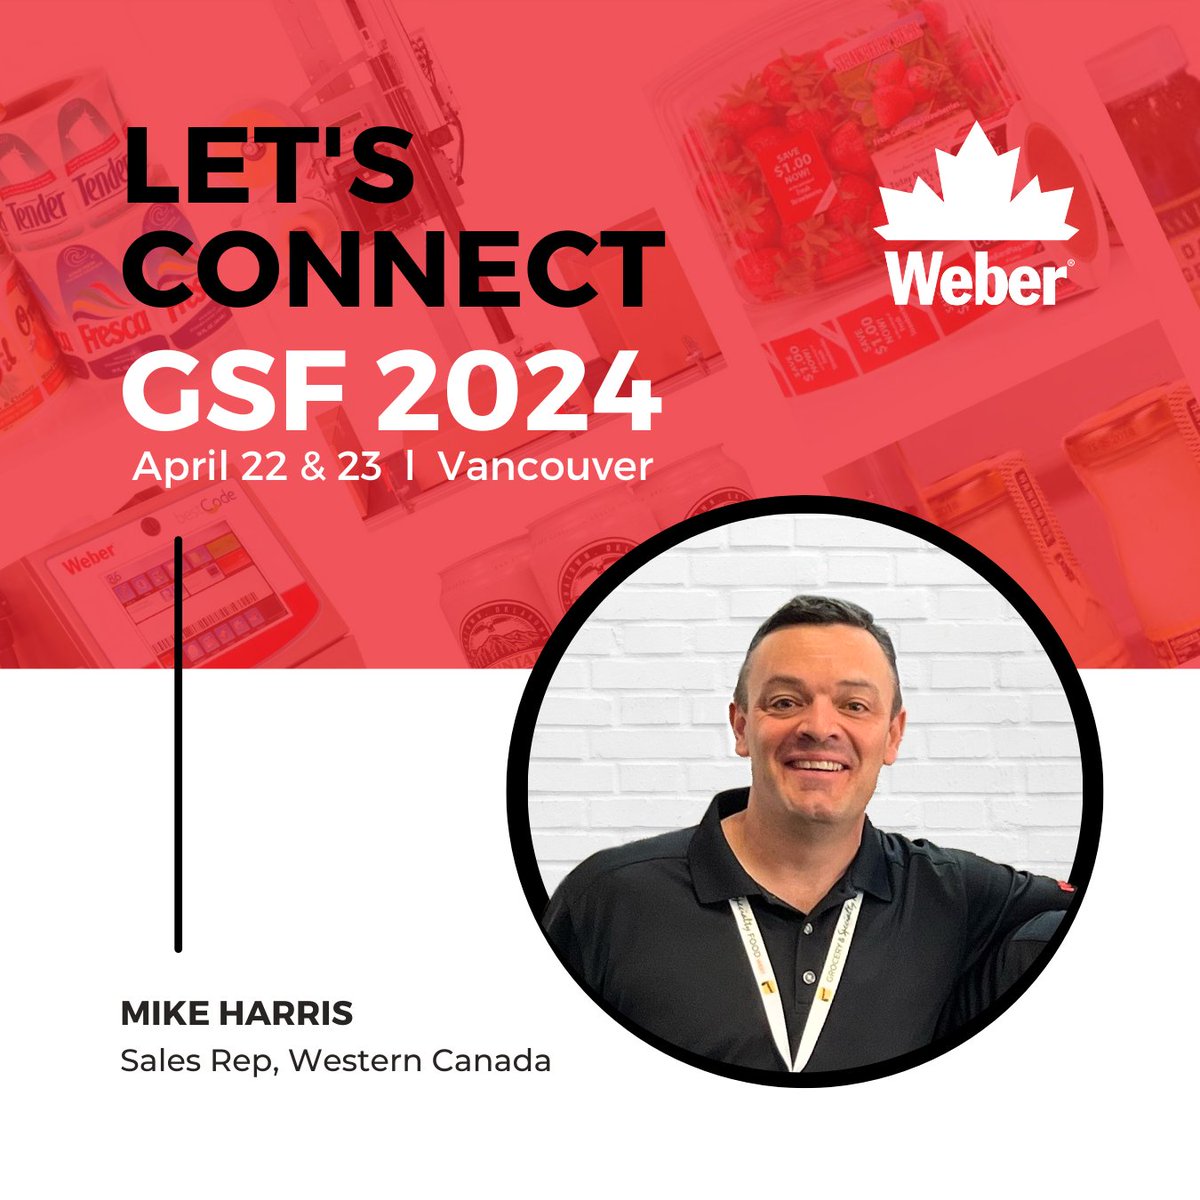 📣 ONE WEEK away! Connect with #WeberCanada at #GSFShow24!
APRIL 22 & 23 l Booth #1726 l Vancouver Convention Centre

Arrange an on-site meeting with your local Weber Sales Rep, Mike Harris. 
➡️ mharris@webermarking.ca

#tradeshow #foodandbeverage #labelingsolutions